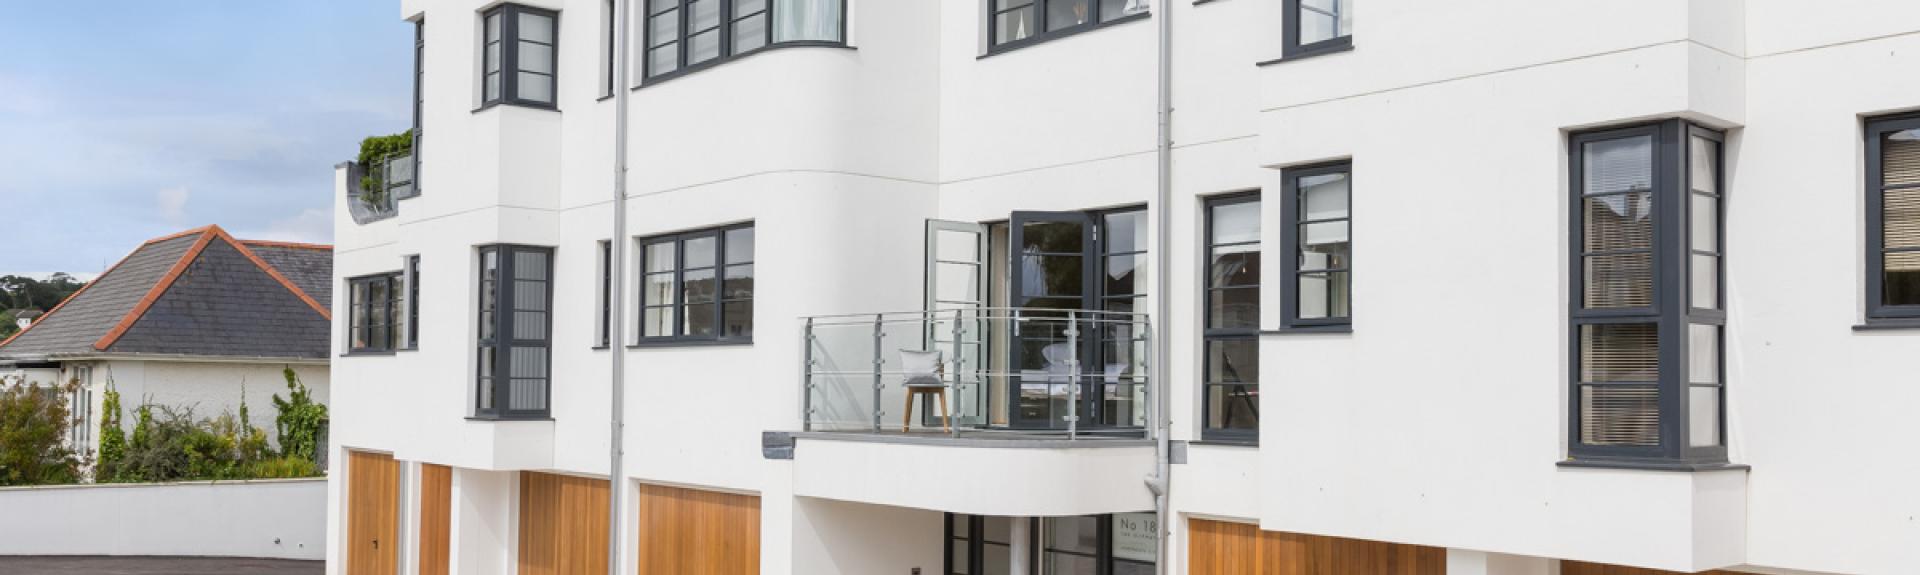 Exterior of a row of modern 3-storey holiday apartments in Falmouth.